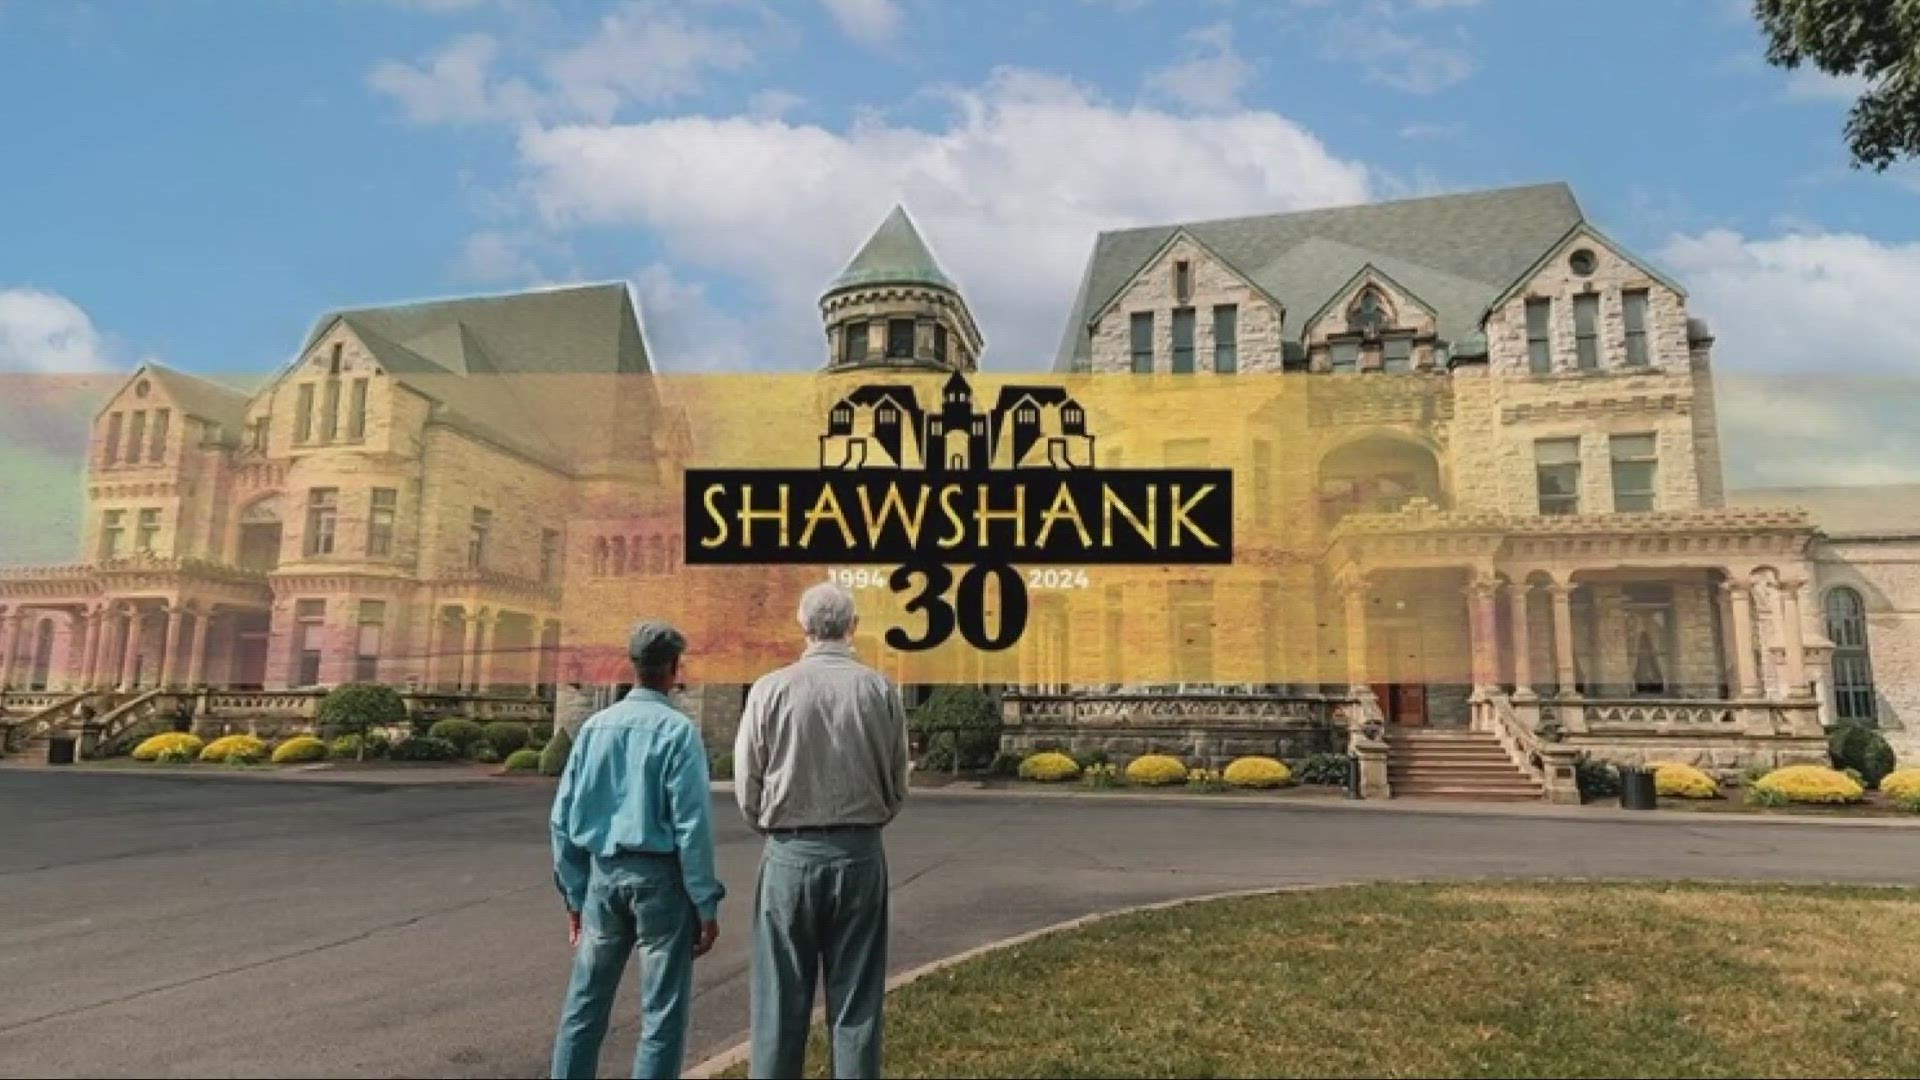 The 30th Anniversary of “The Shawshank Redemption” will be celebrated on  August 9-11, 2024, at the film's shooting sites in Mansfield, Ashland, and Upper Sandusky.